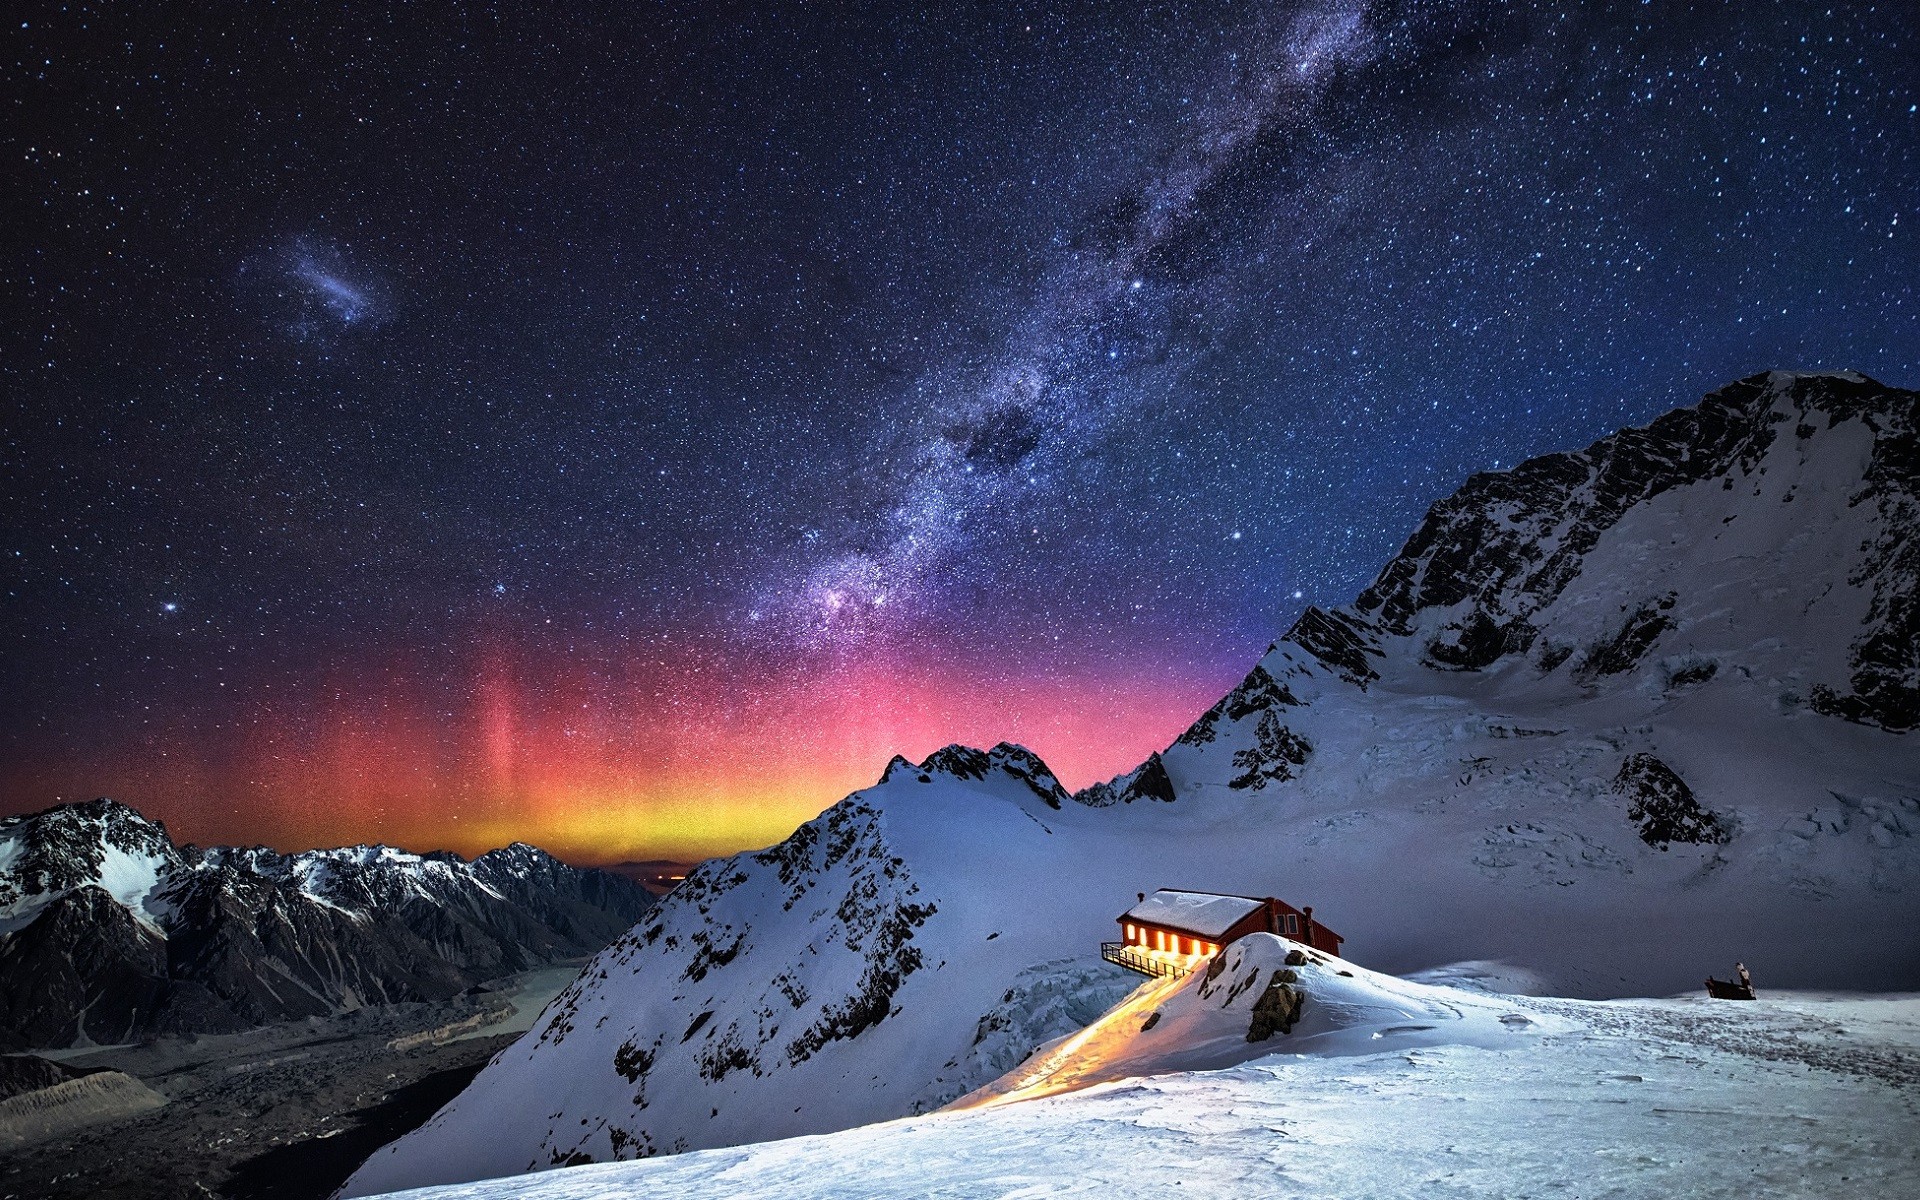 General 1920x1200 nature mountains snow stars Milky Way landscape sky cabin hut snowy peak snowy mountain cold outdoors ice winter